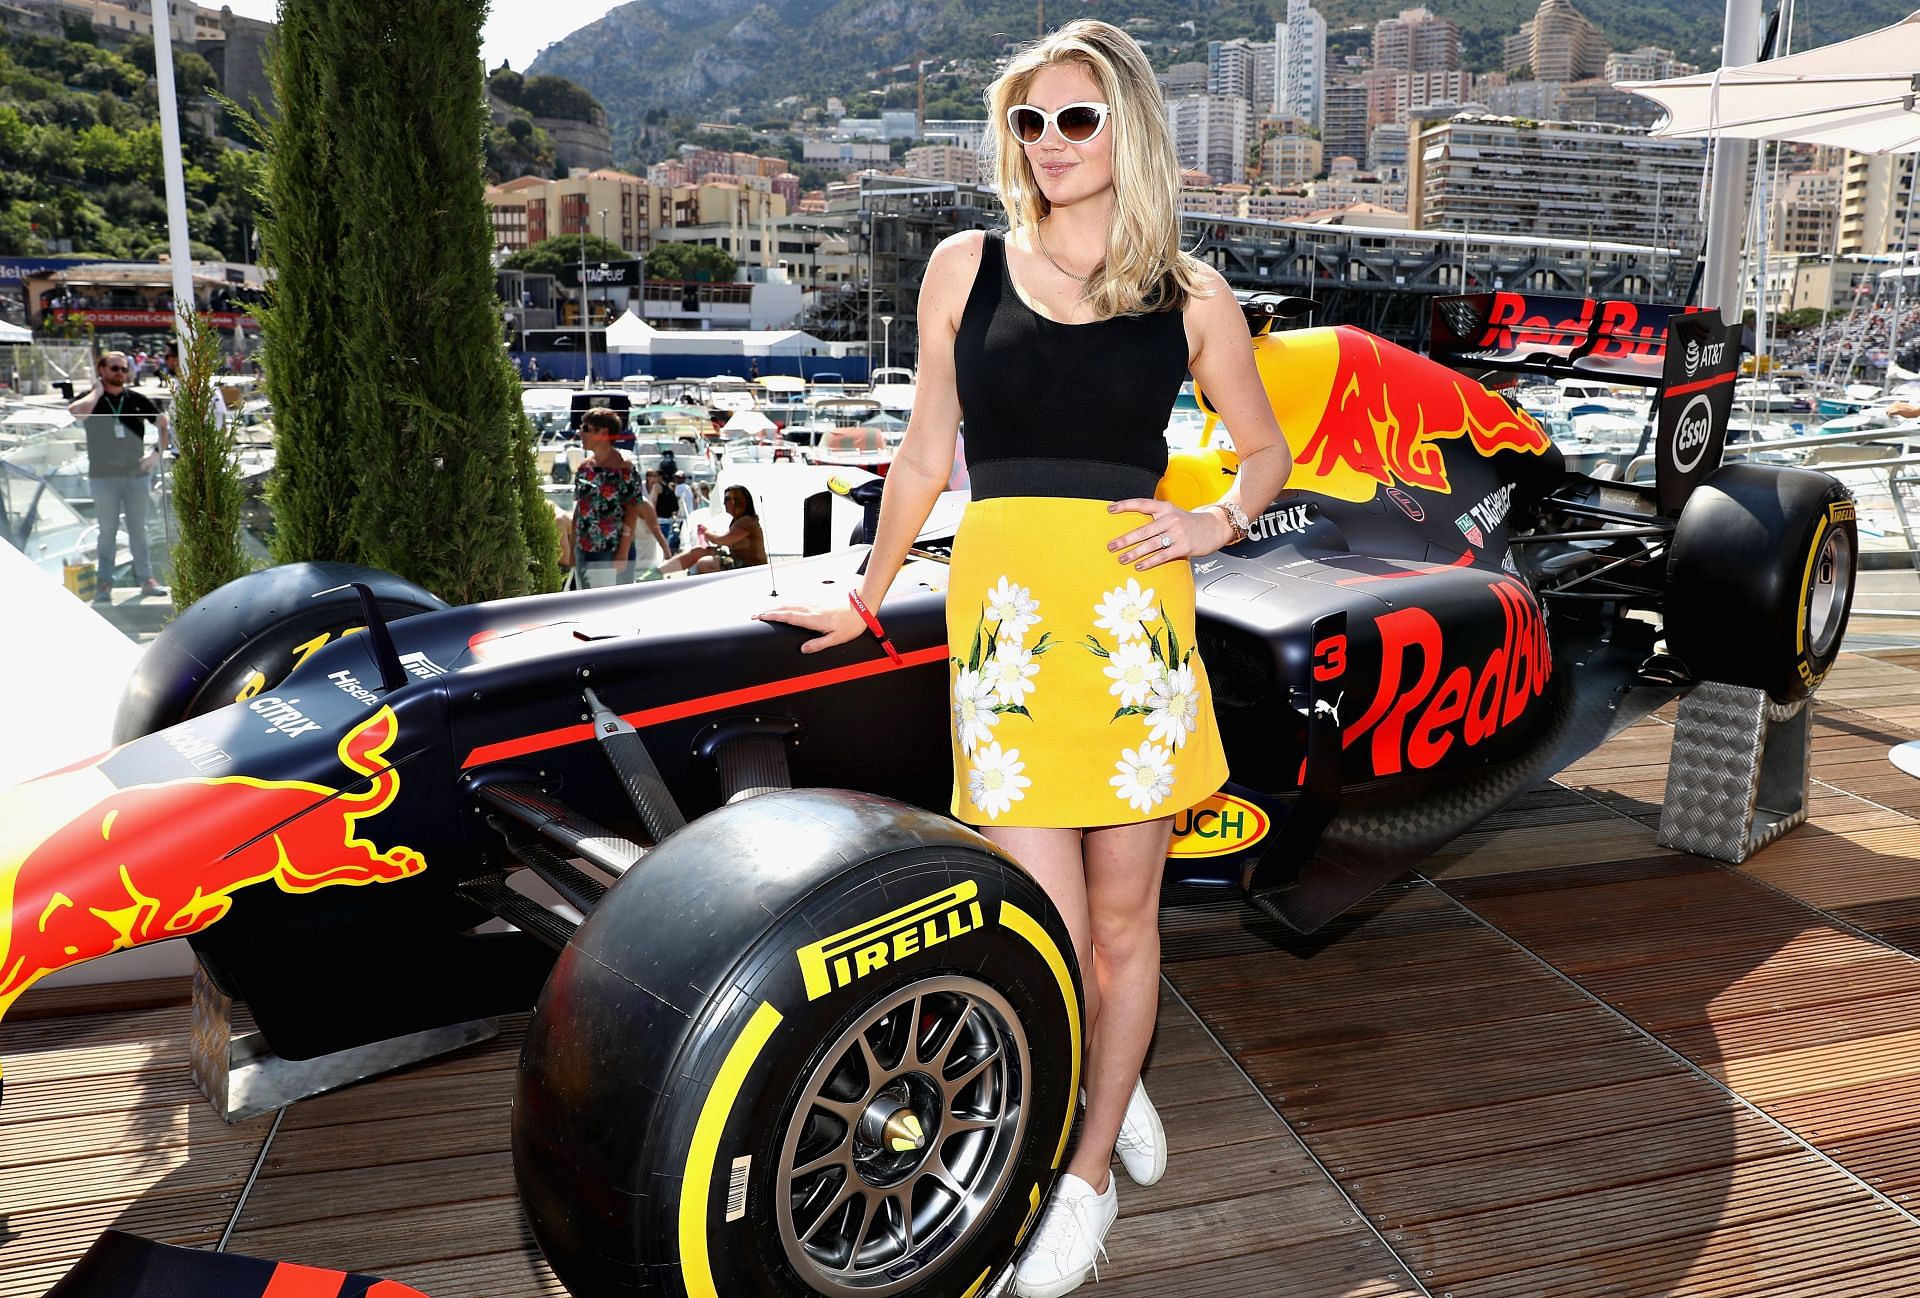 F1 Grand Prix of Monaco - Qualifying: MONTE-CARLO, MONACO - MAY 27: Model Kate Upton on the Red Bull Racing Energy Station during qualifying for the Monaco Formula One Grand Prix at Circuit de Monaco on May 27, 2017, in Monte-Carlo, Monaco. (Photo by Mark Thompson/Getty Images)